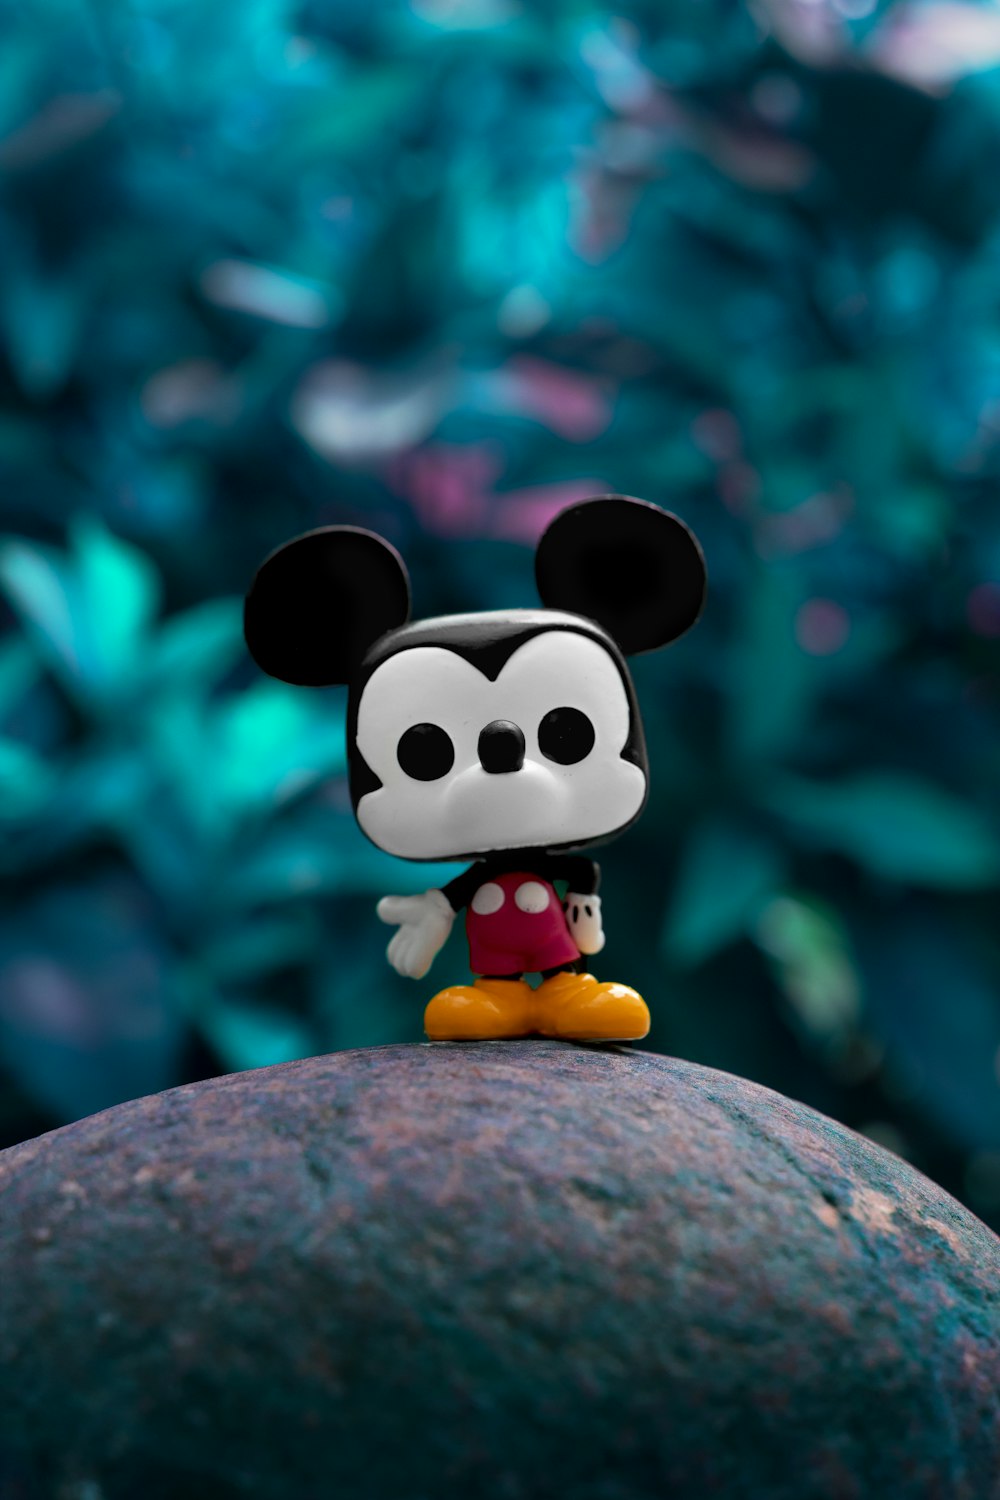 Mickey Disney Pictures | Download Free Images on Unsplash